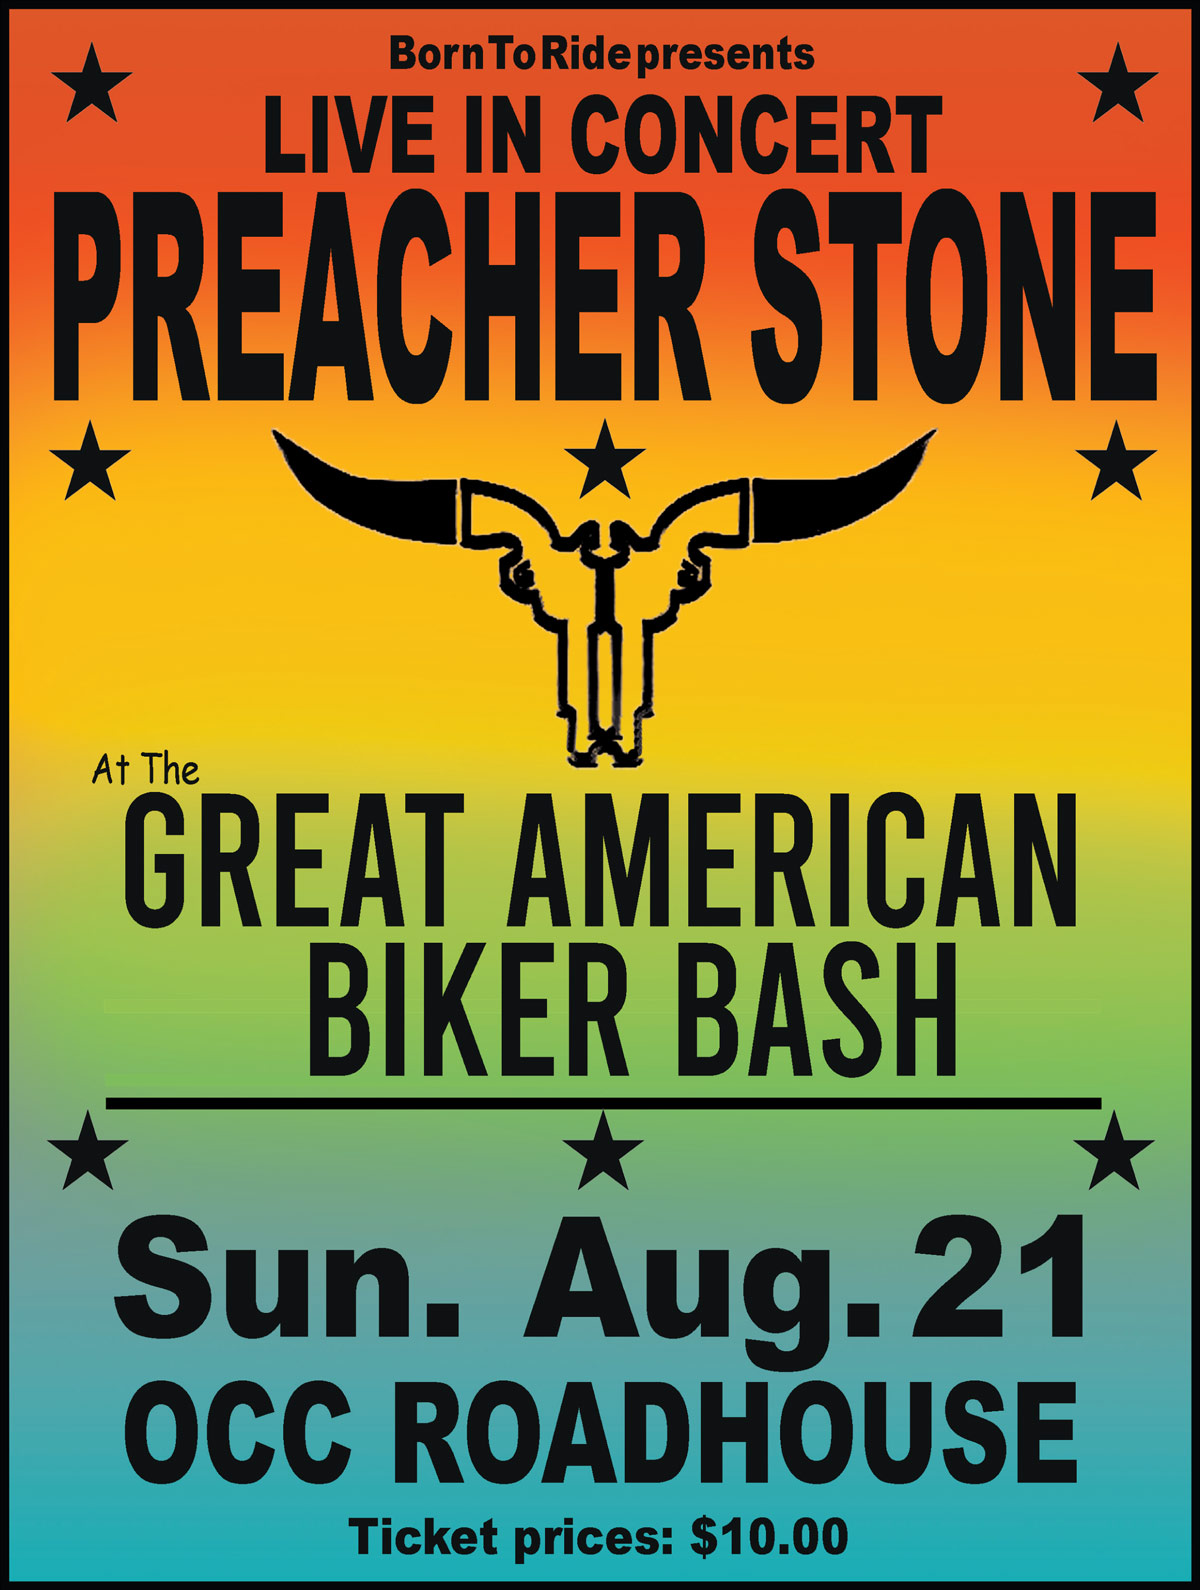 Preacher Stone live in concert during the Great American Biker Bash!